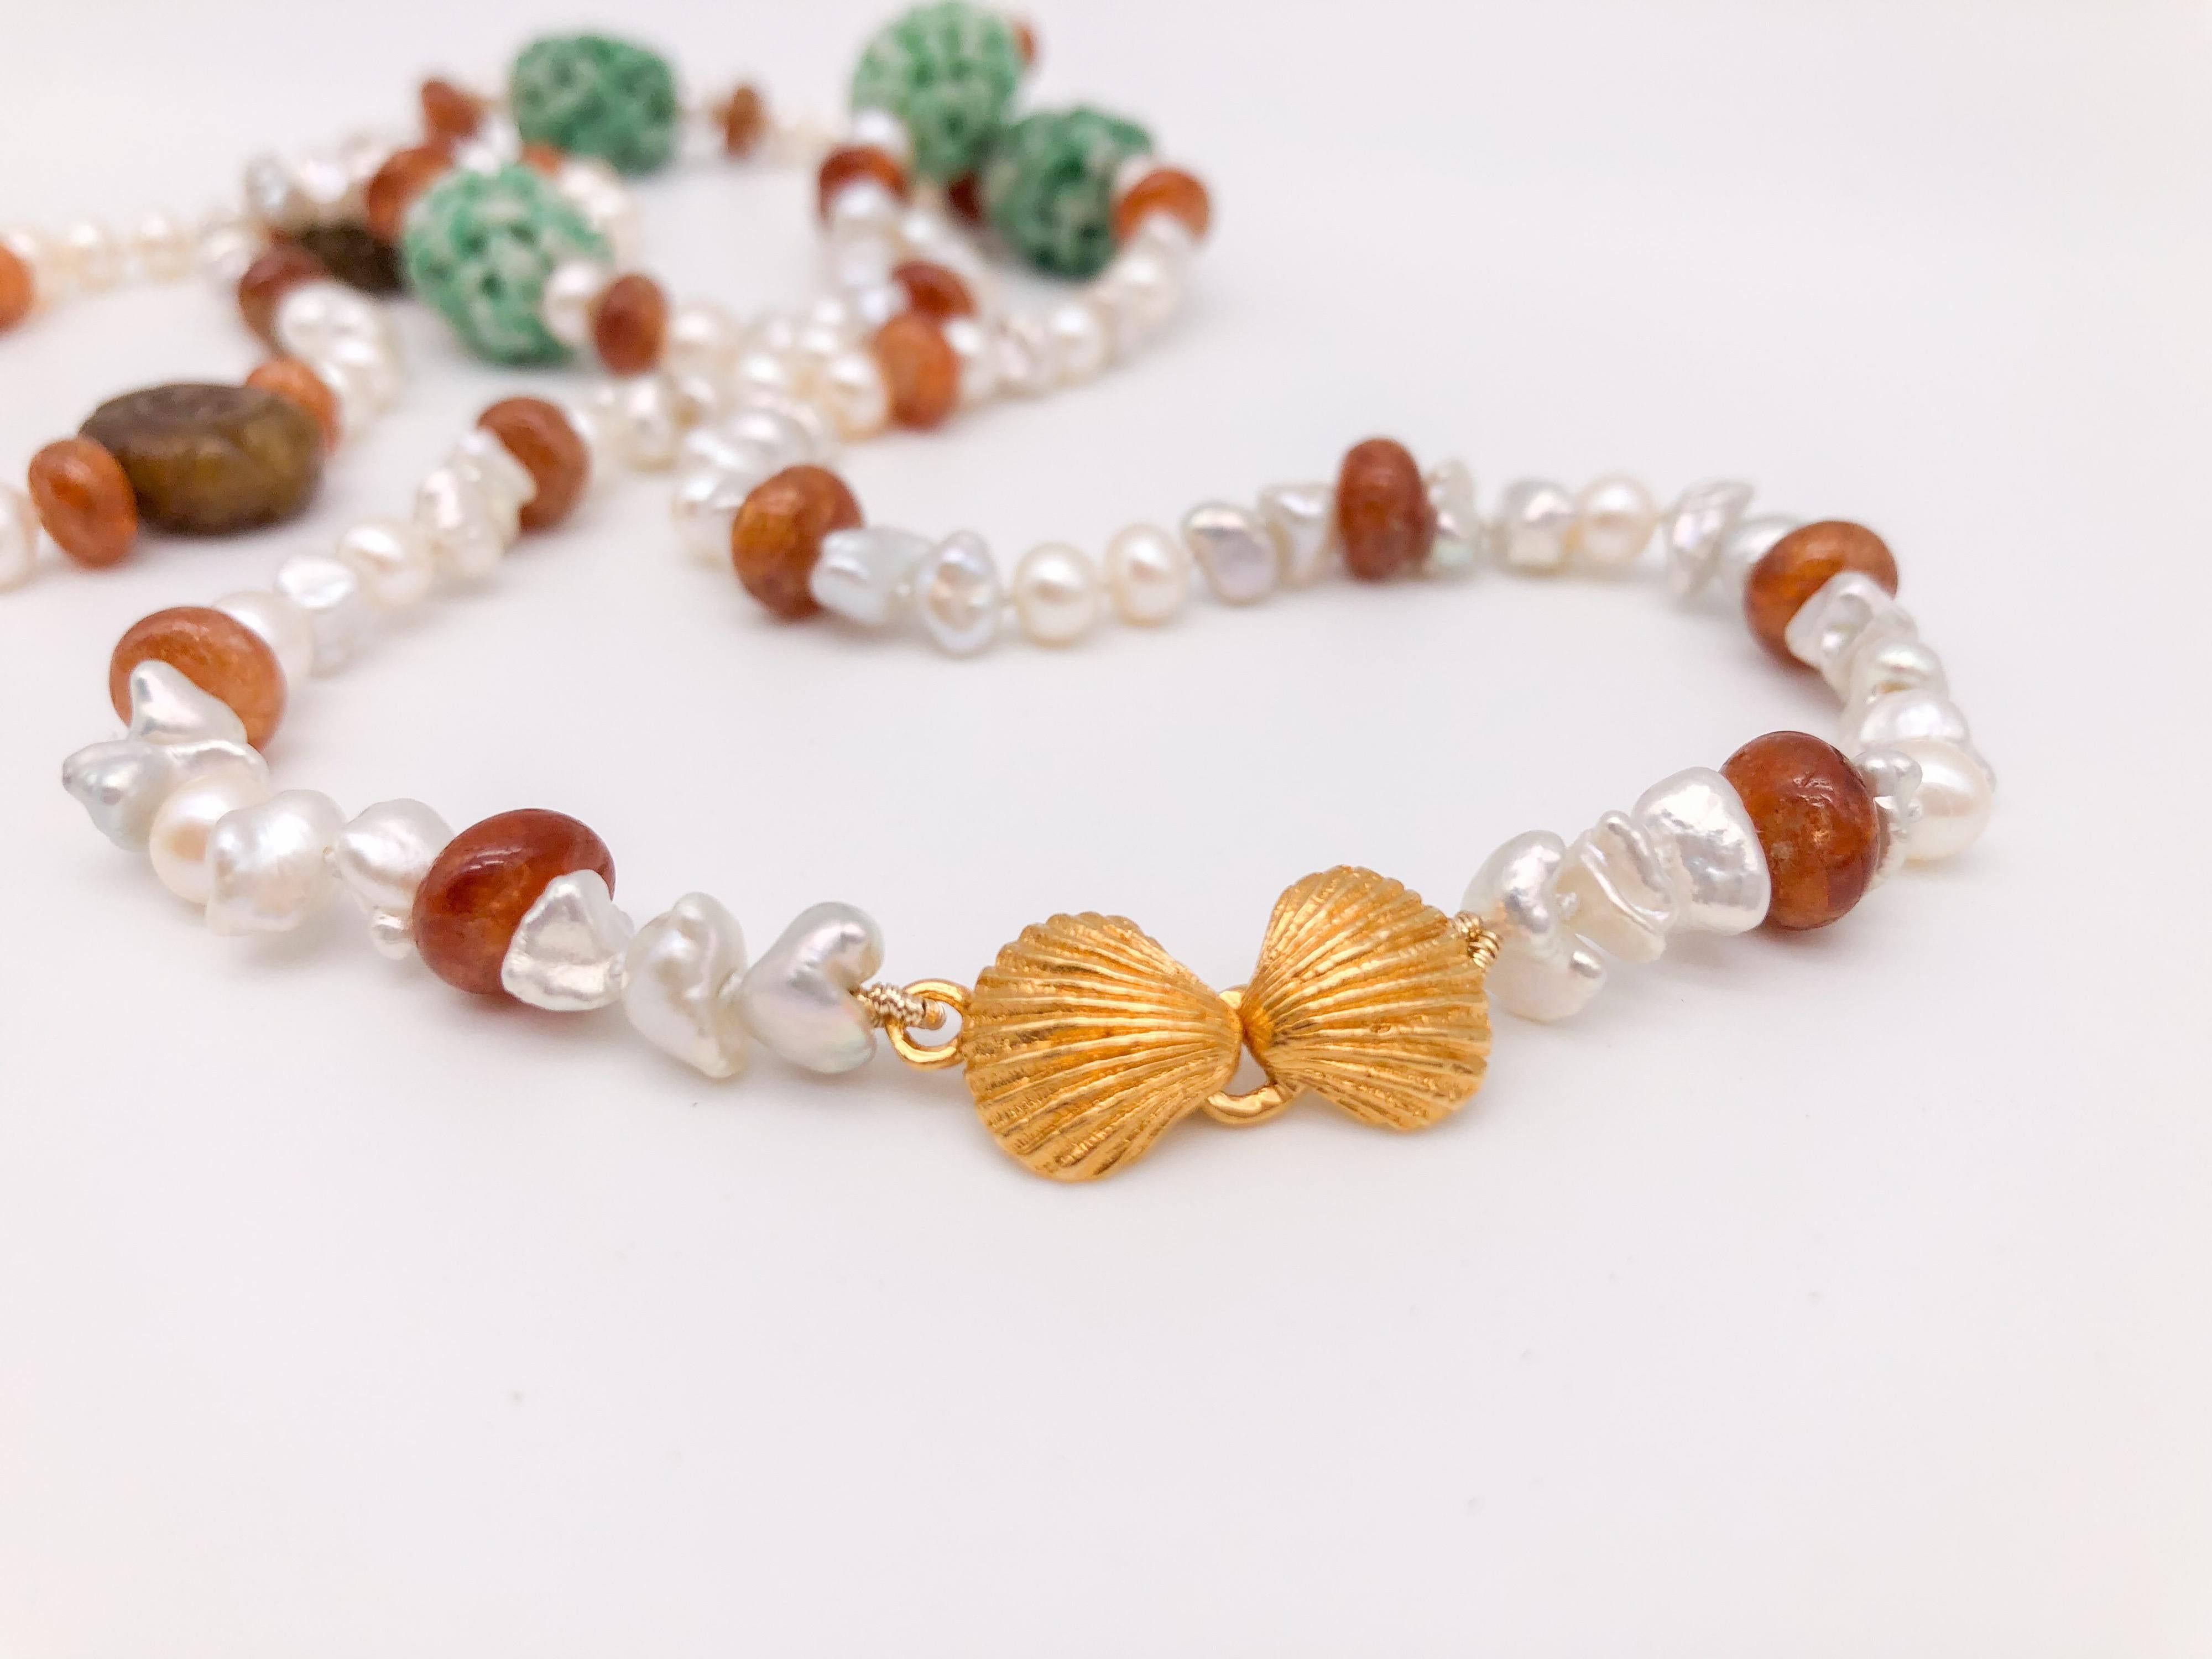 A.Jeschel Splendid Long Pearl, Hessonite, and Tobacco Jade Necklace 5